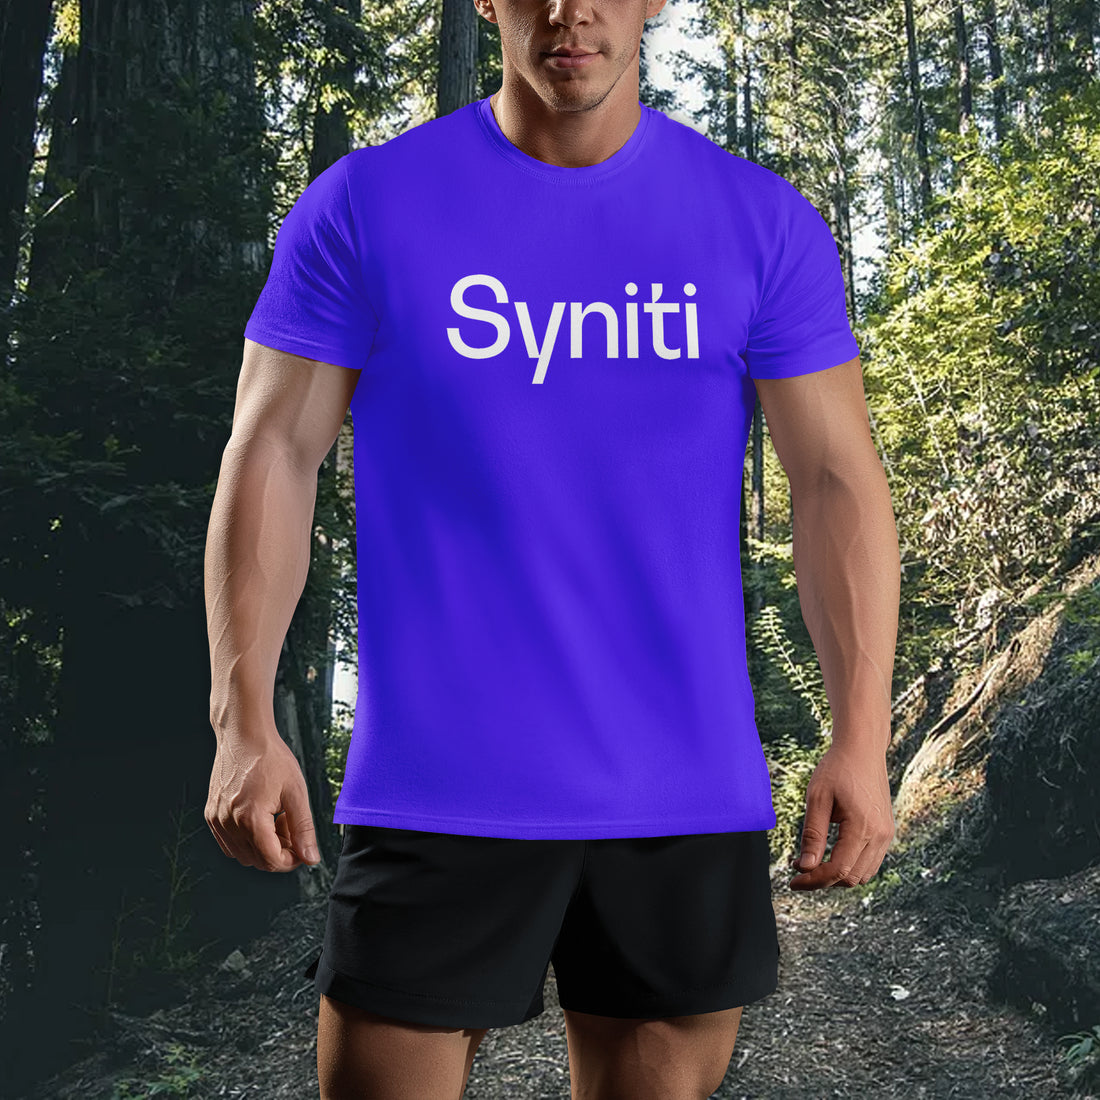 Company christmas gifts, Custom Corporate Gifts Personalized Syniti T-Shirts, Customized Tee with Company logo, PR064-23020066